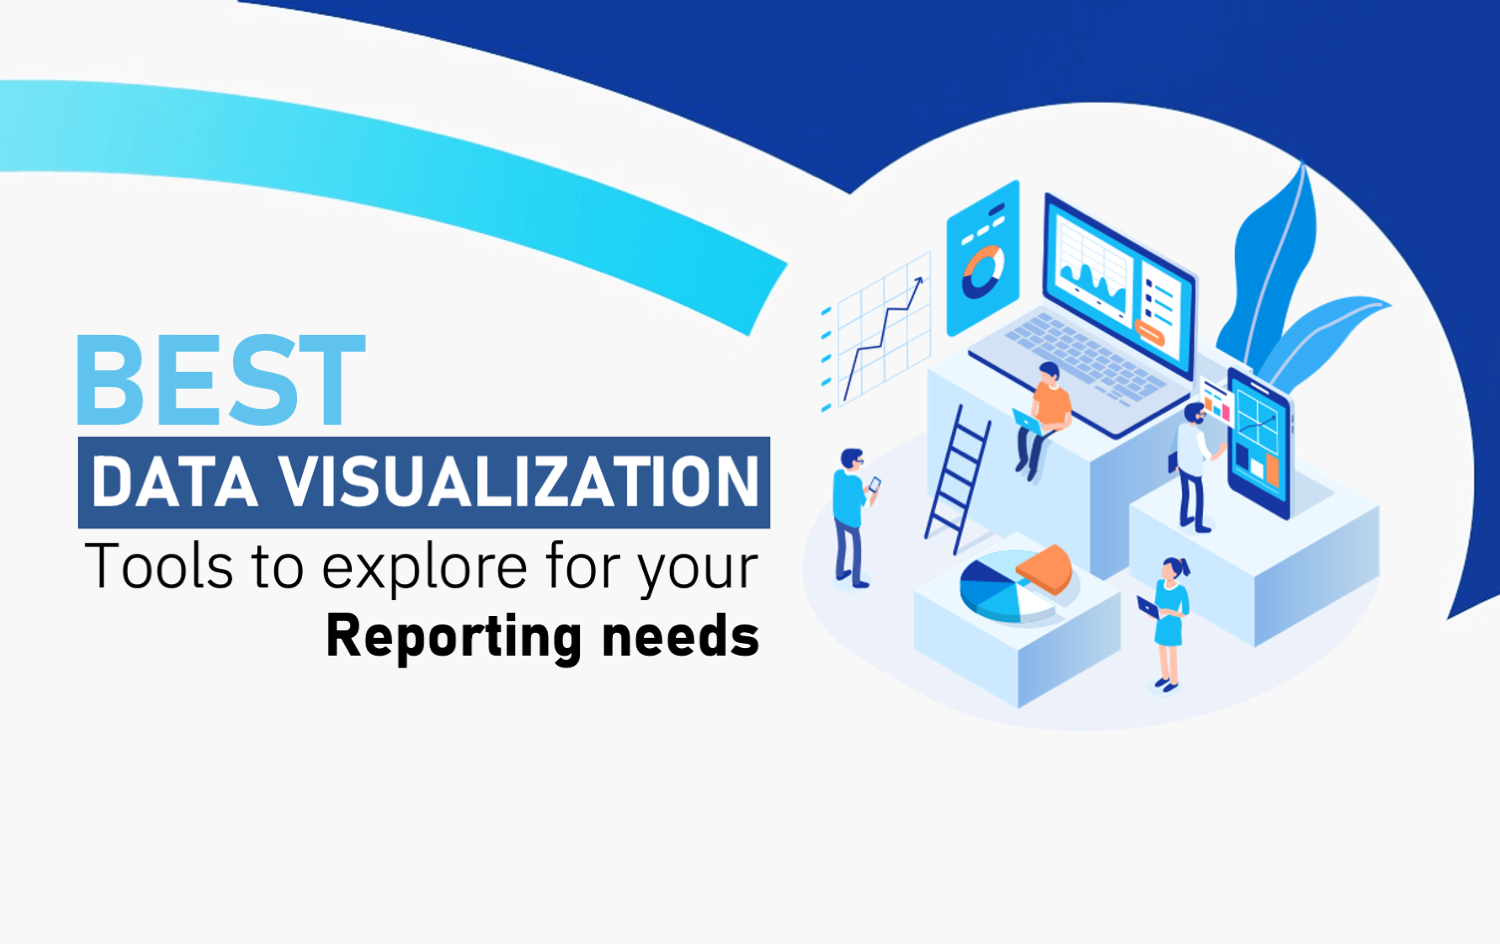 Best Data Visualization tools to explore for your reporting needs